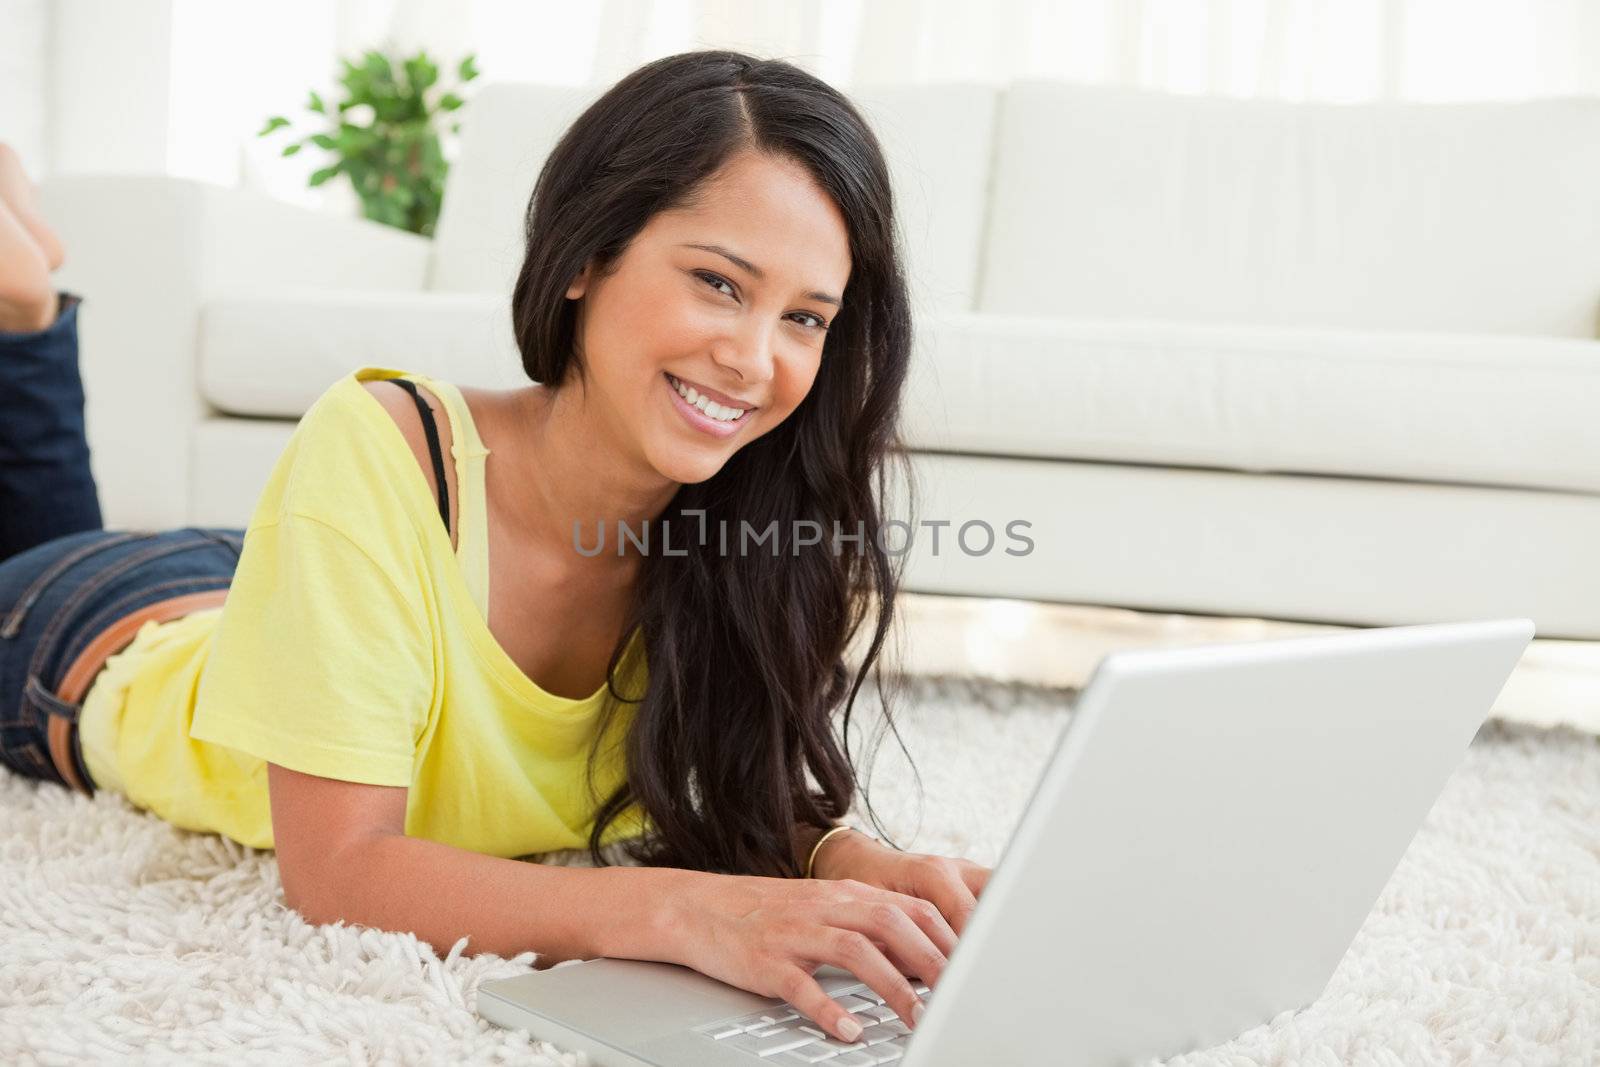 Portrait of a beaming Latin woman using a laptop while lying on the floor